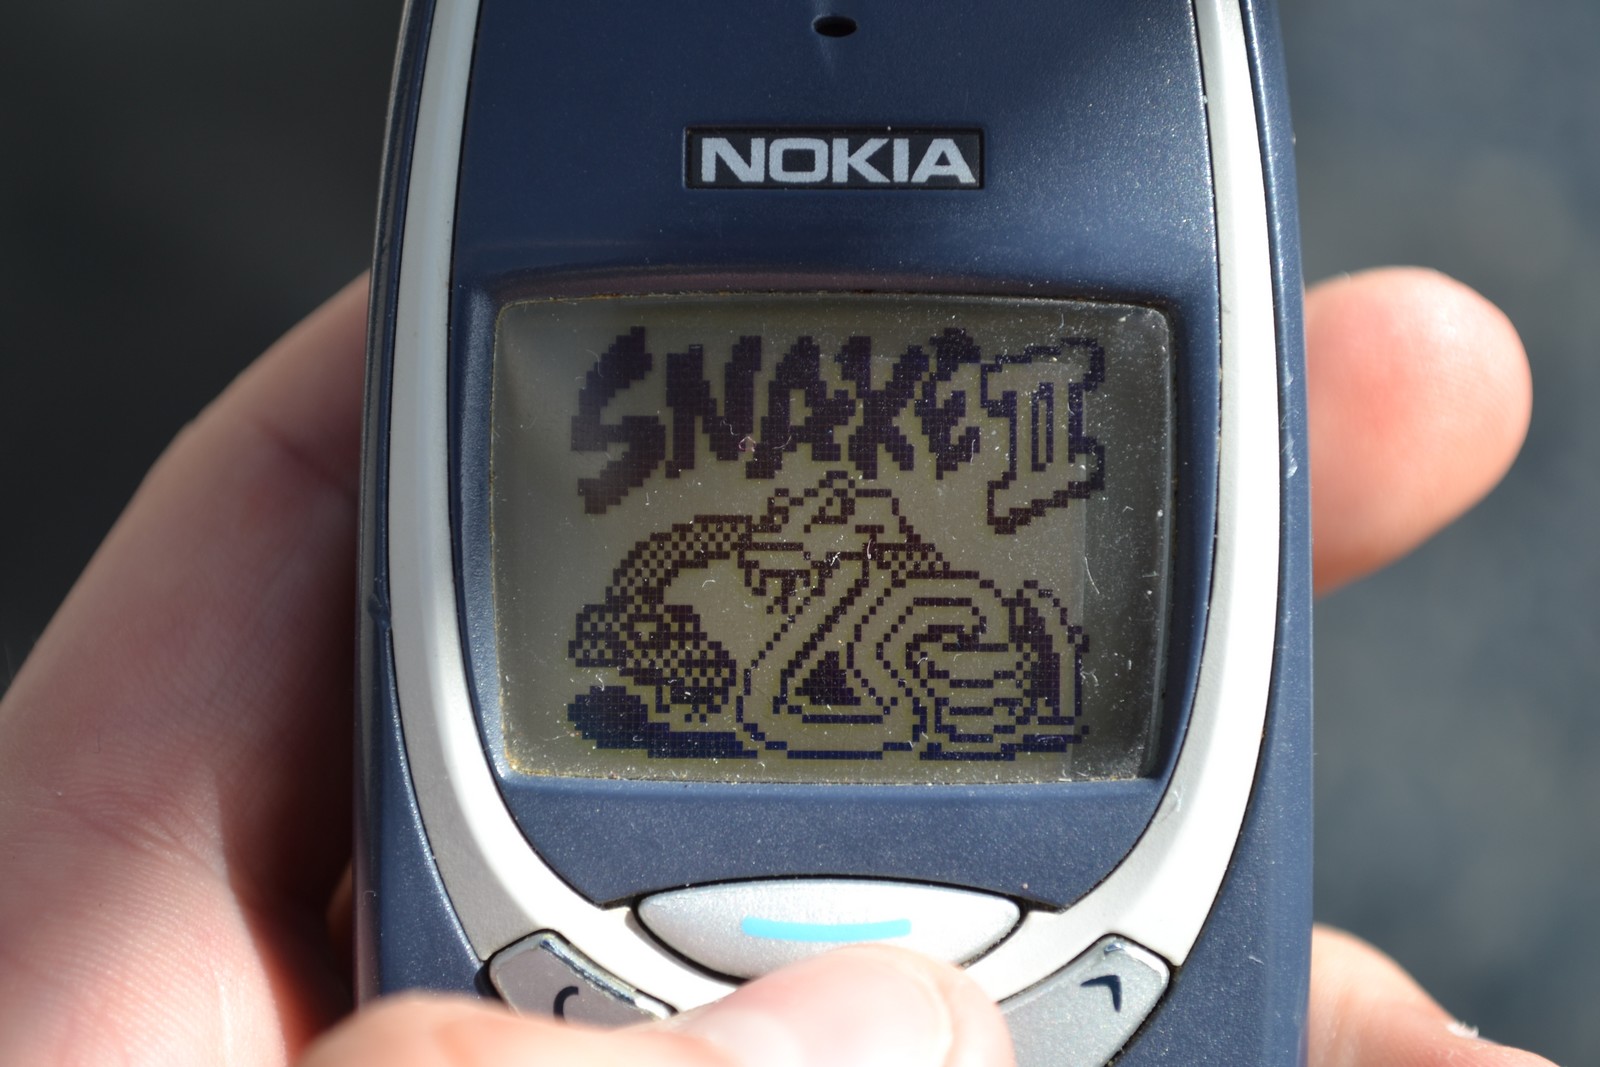 Nokia 3310 relaunching at MWC 2017 - Colored Screen; No Android